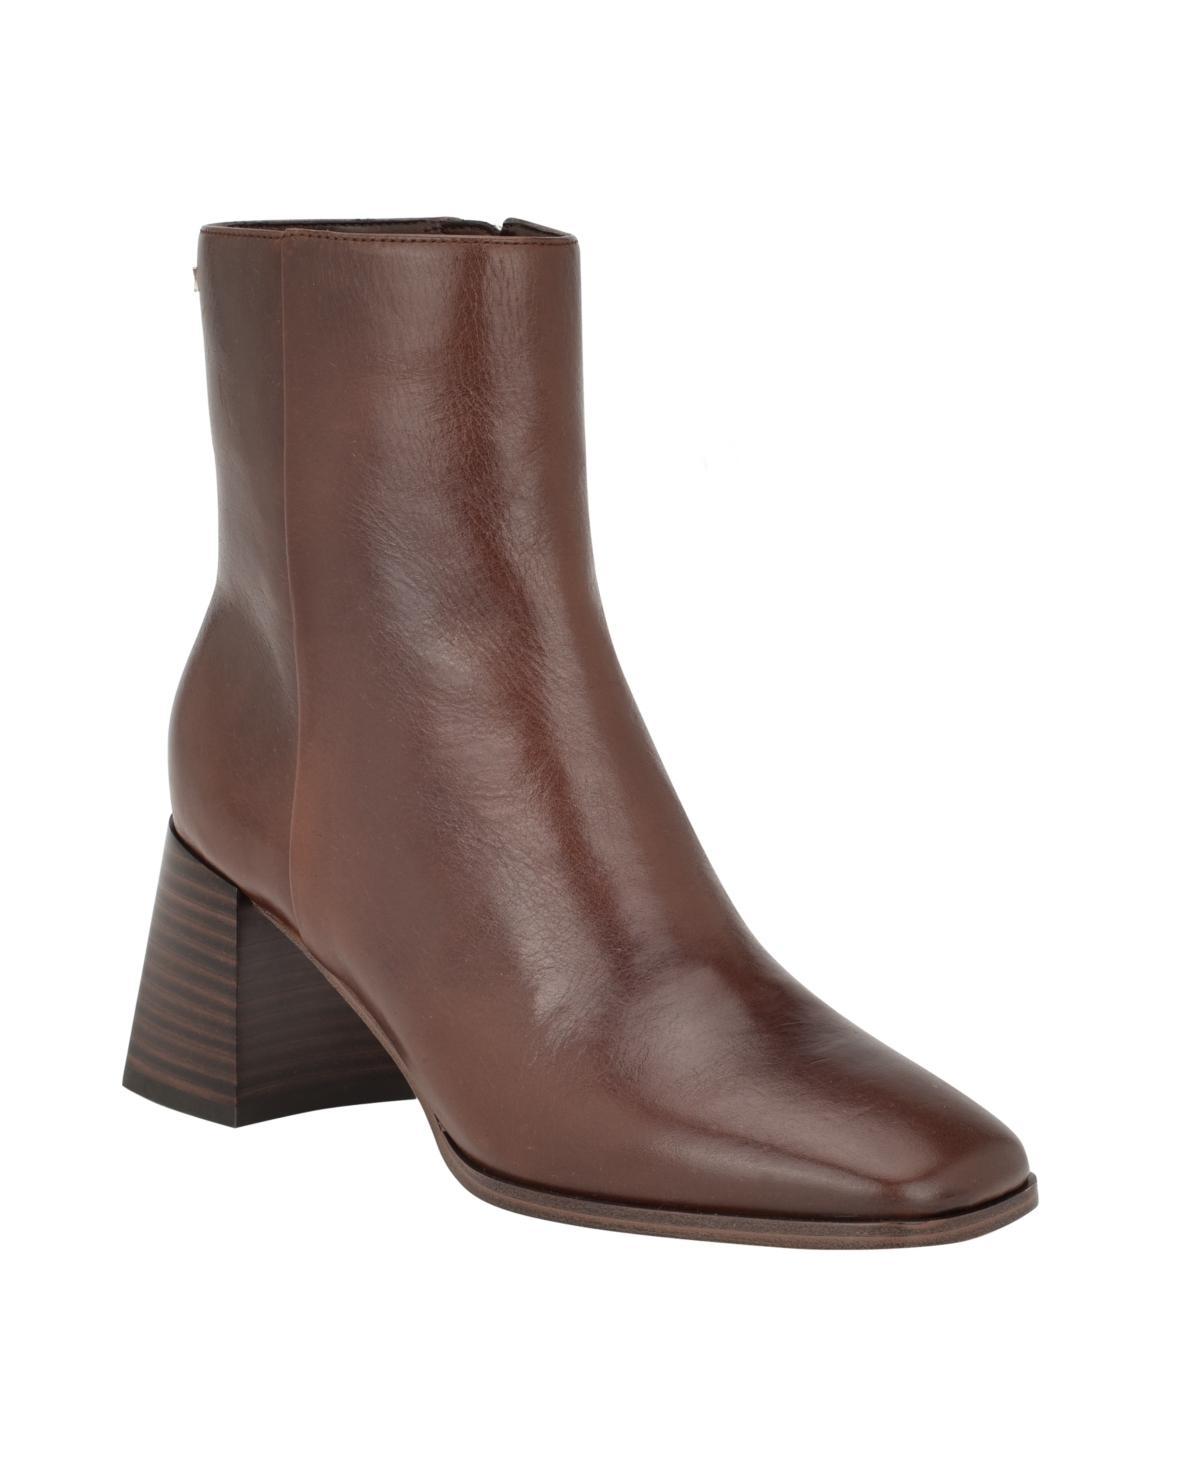 Calvin Klein Broma Bootie Product Image